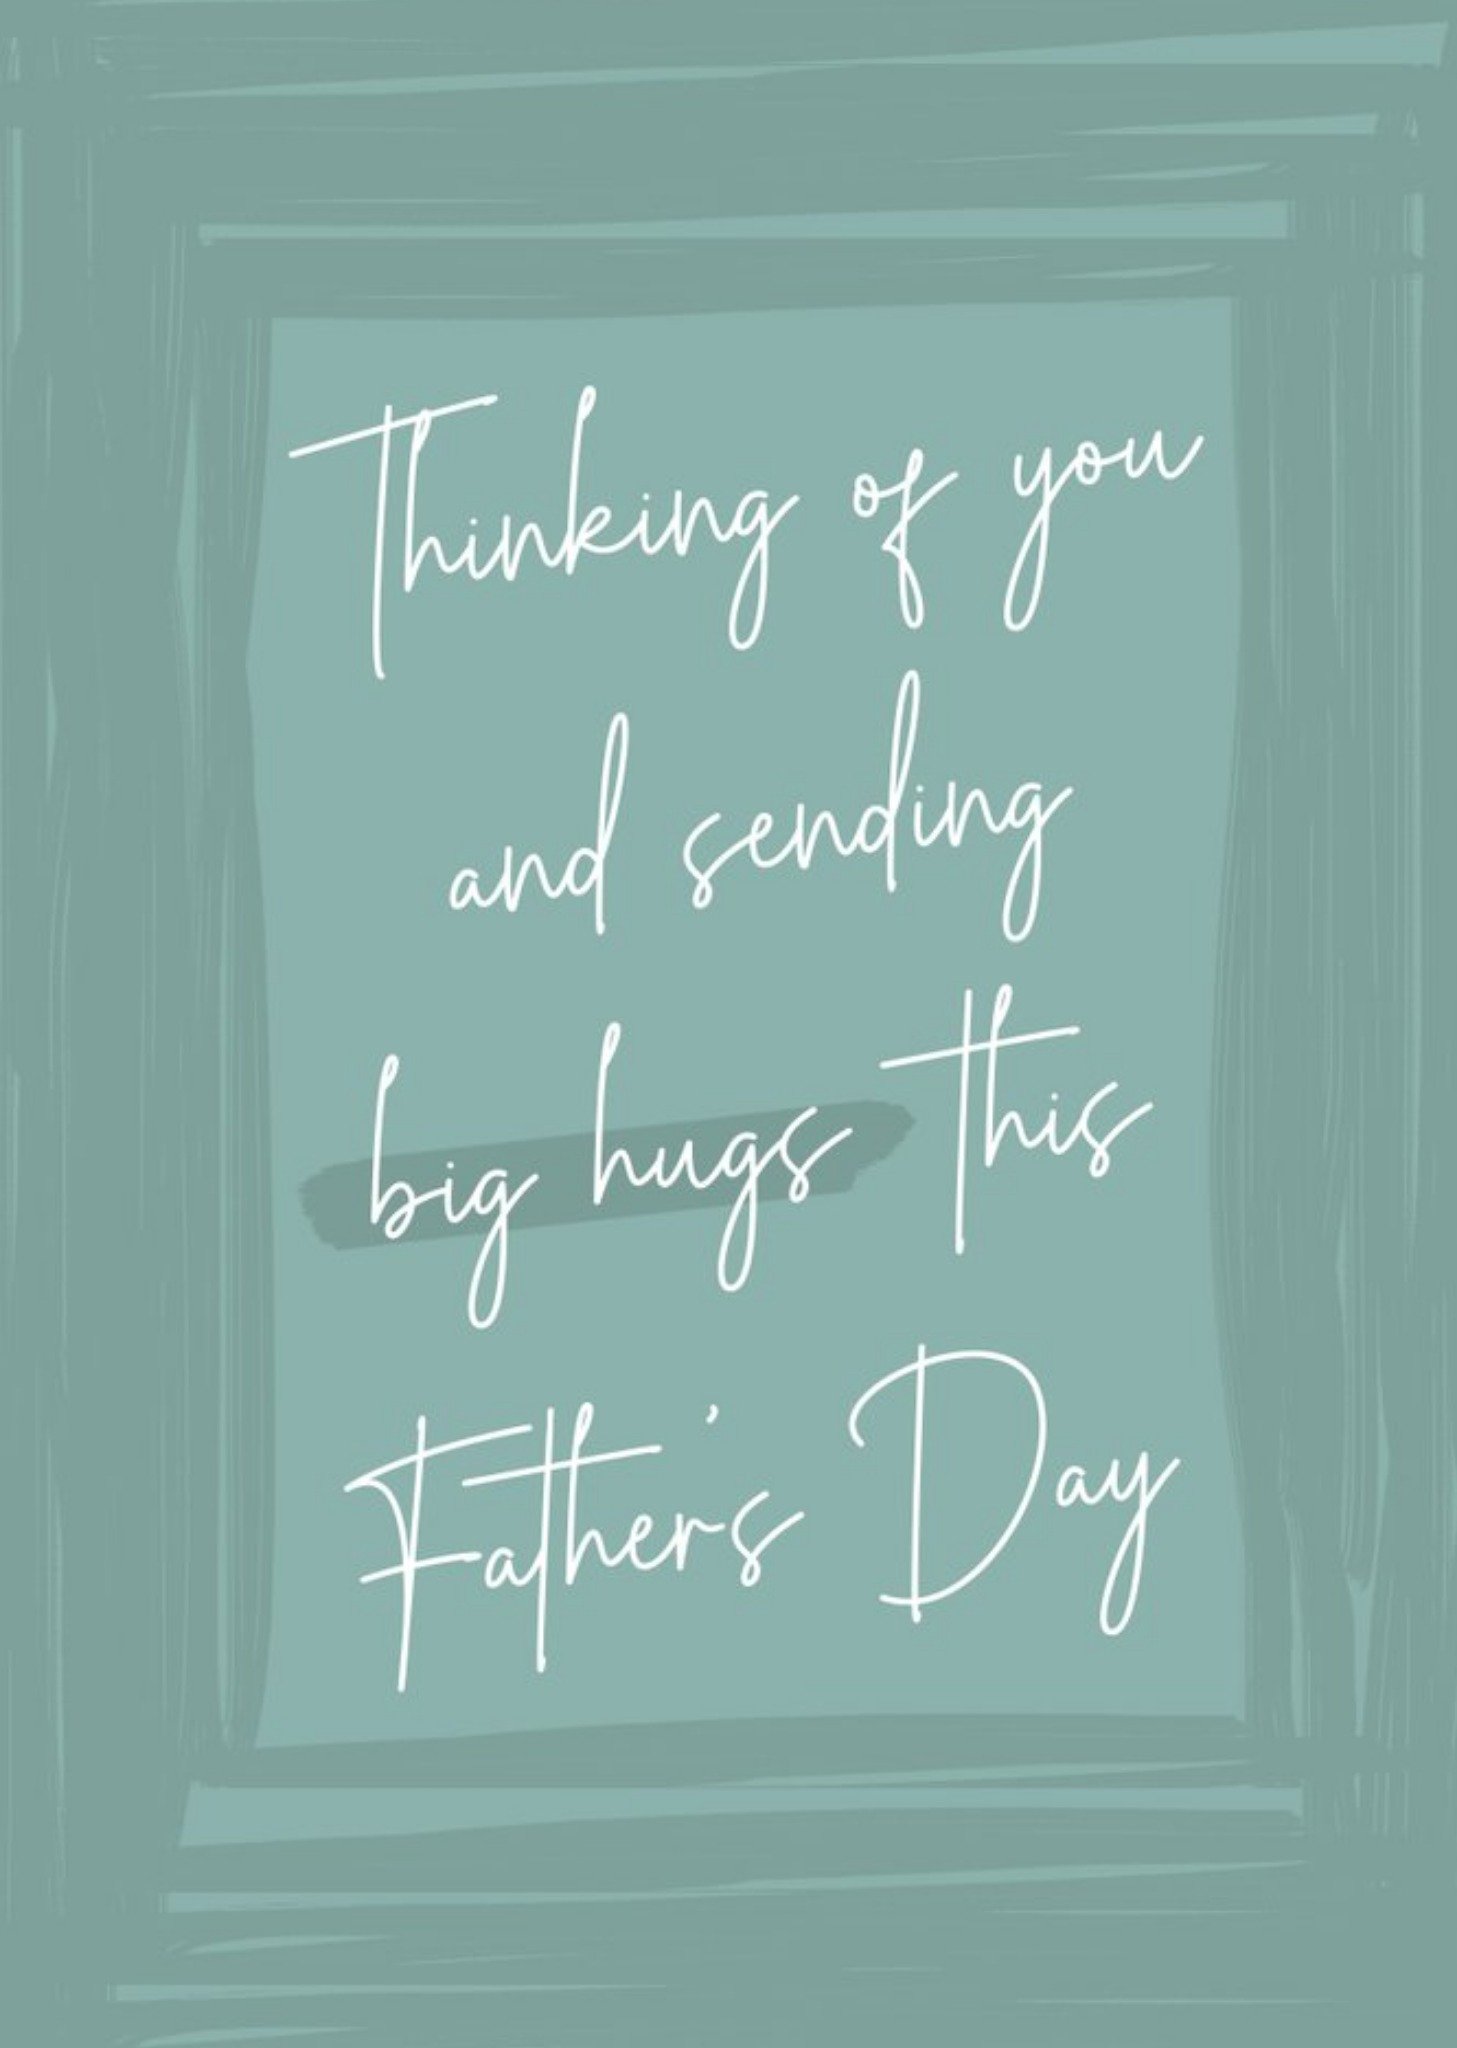 Moonpig Sending Big Hugs Thinking Of You This Father's Day Card Ecard